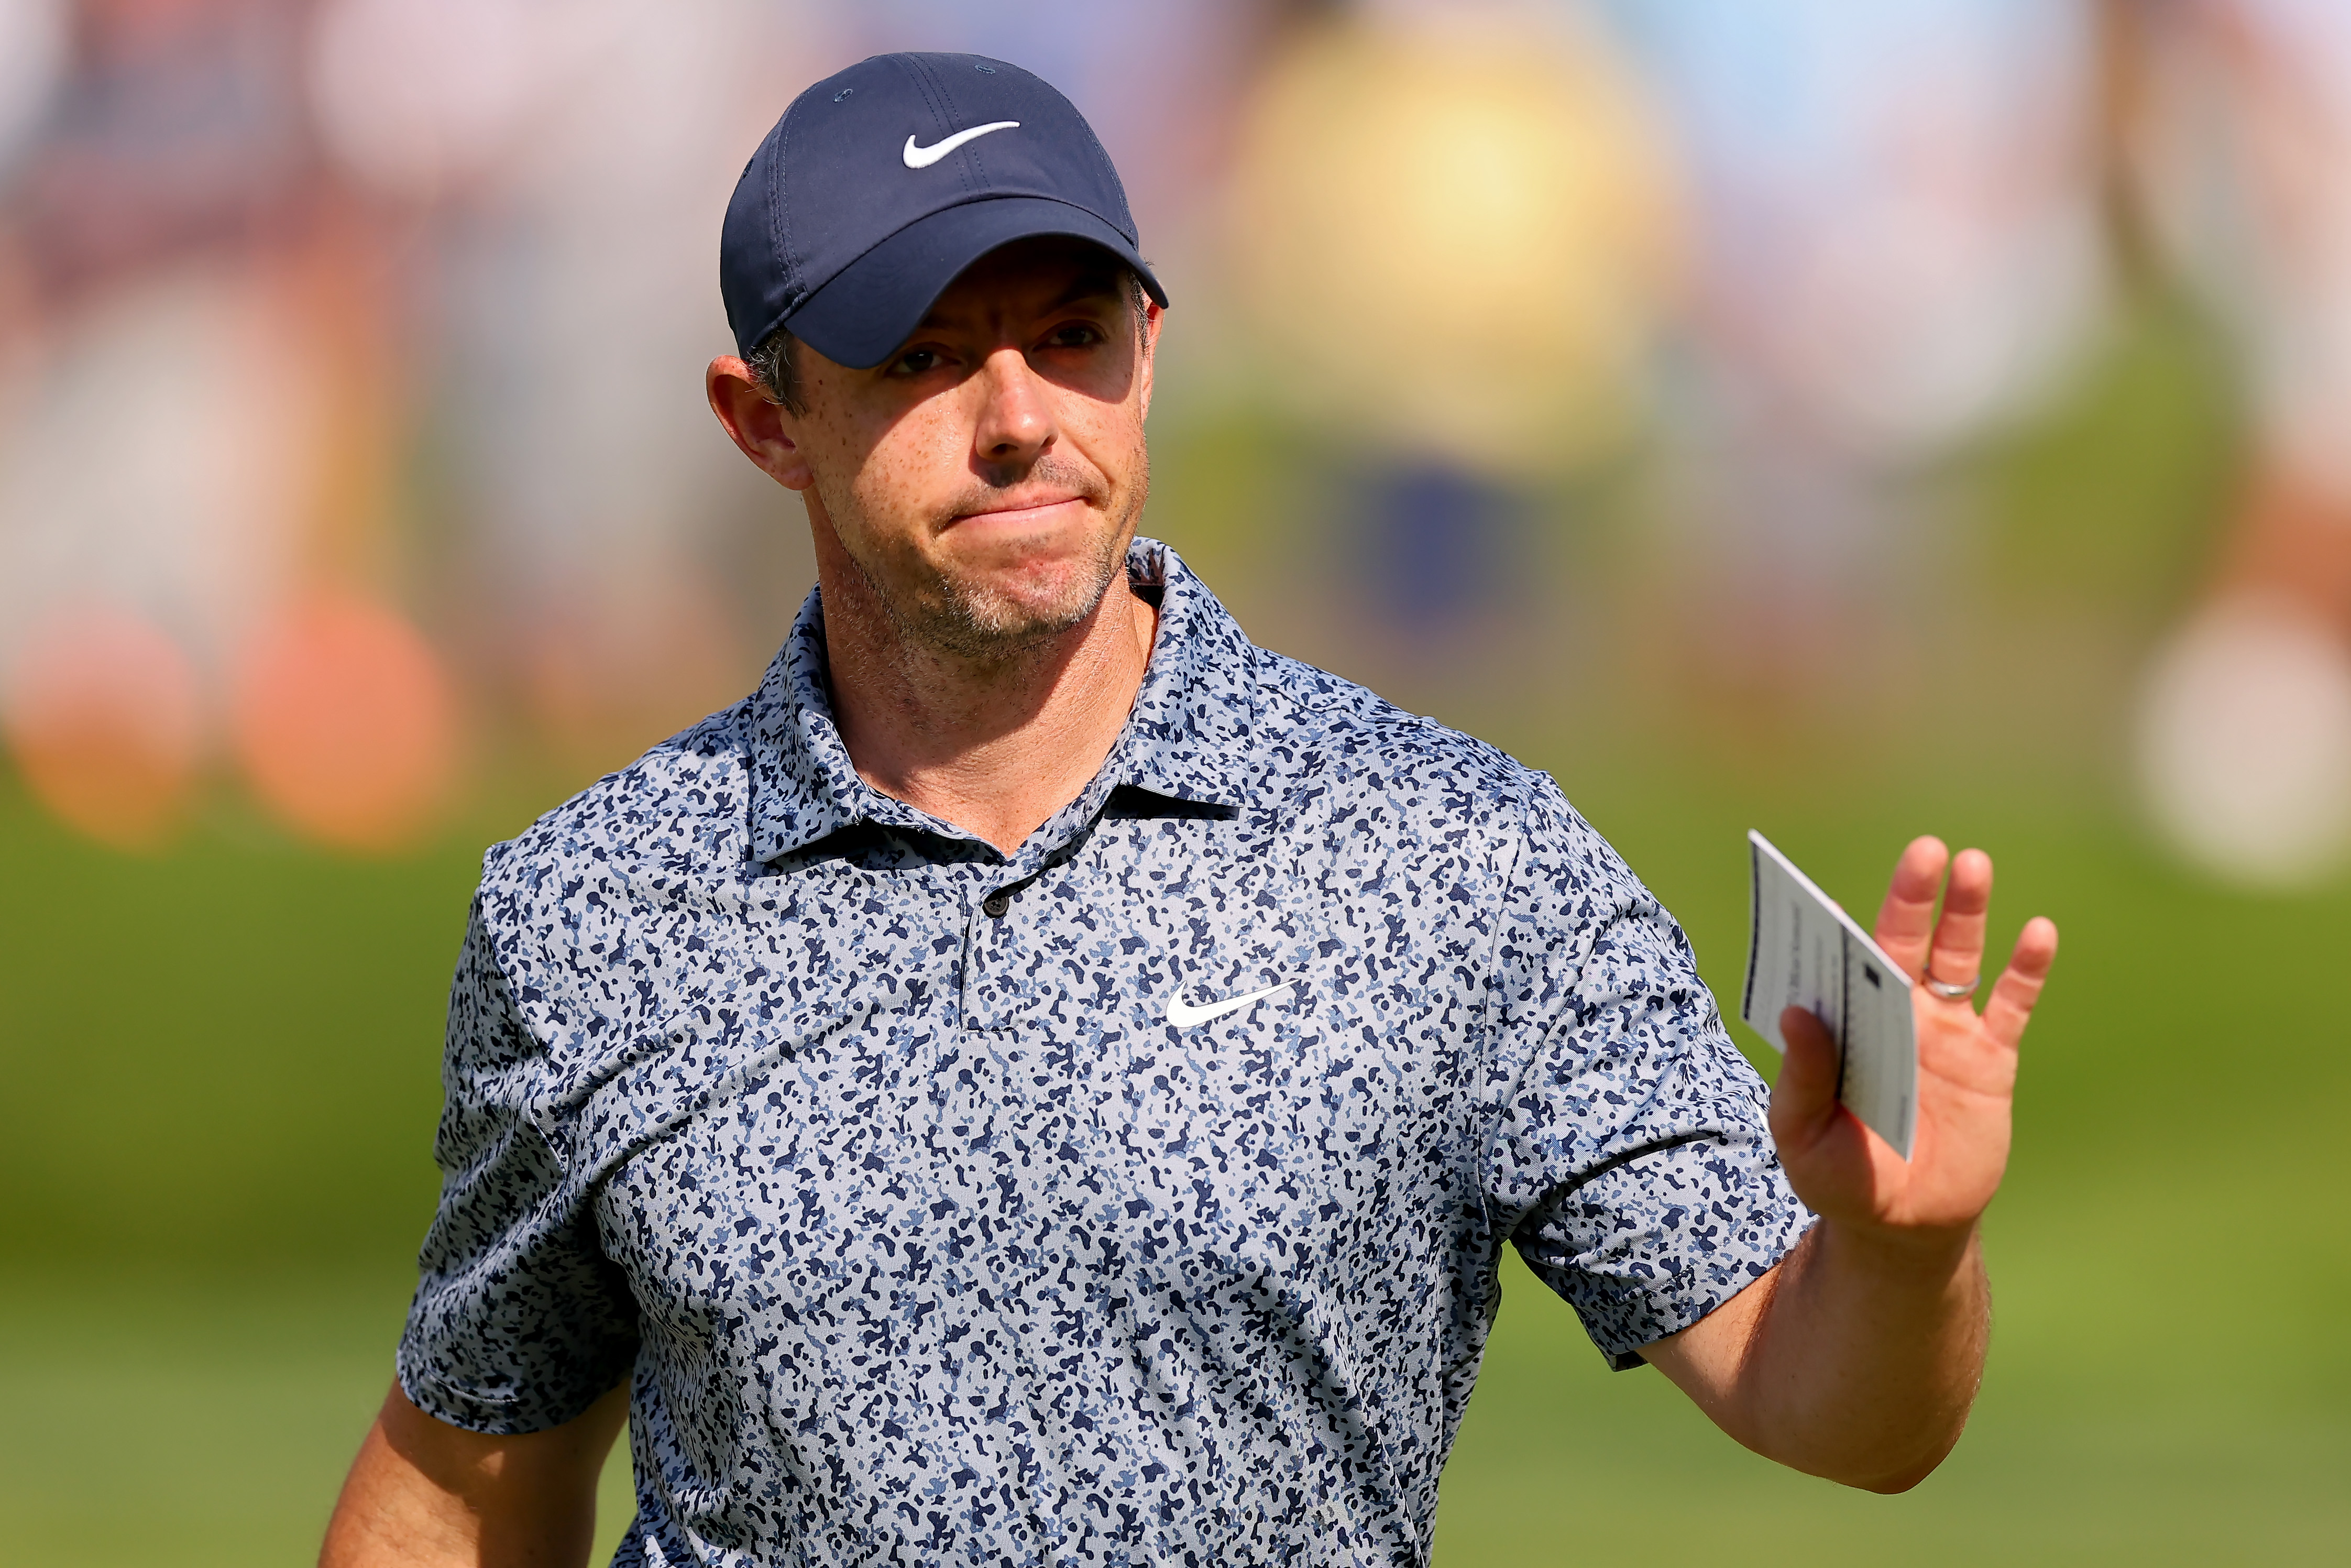 Rory McIlroy hit only 3 fairways during first round of BMW Championship and couldnt have cared less Golf News and Tour Information GolfDigest